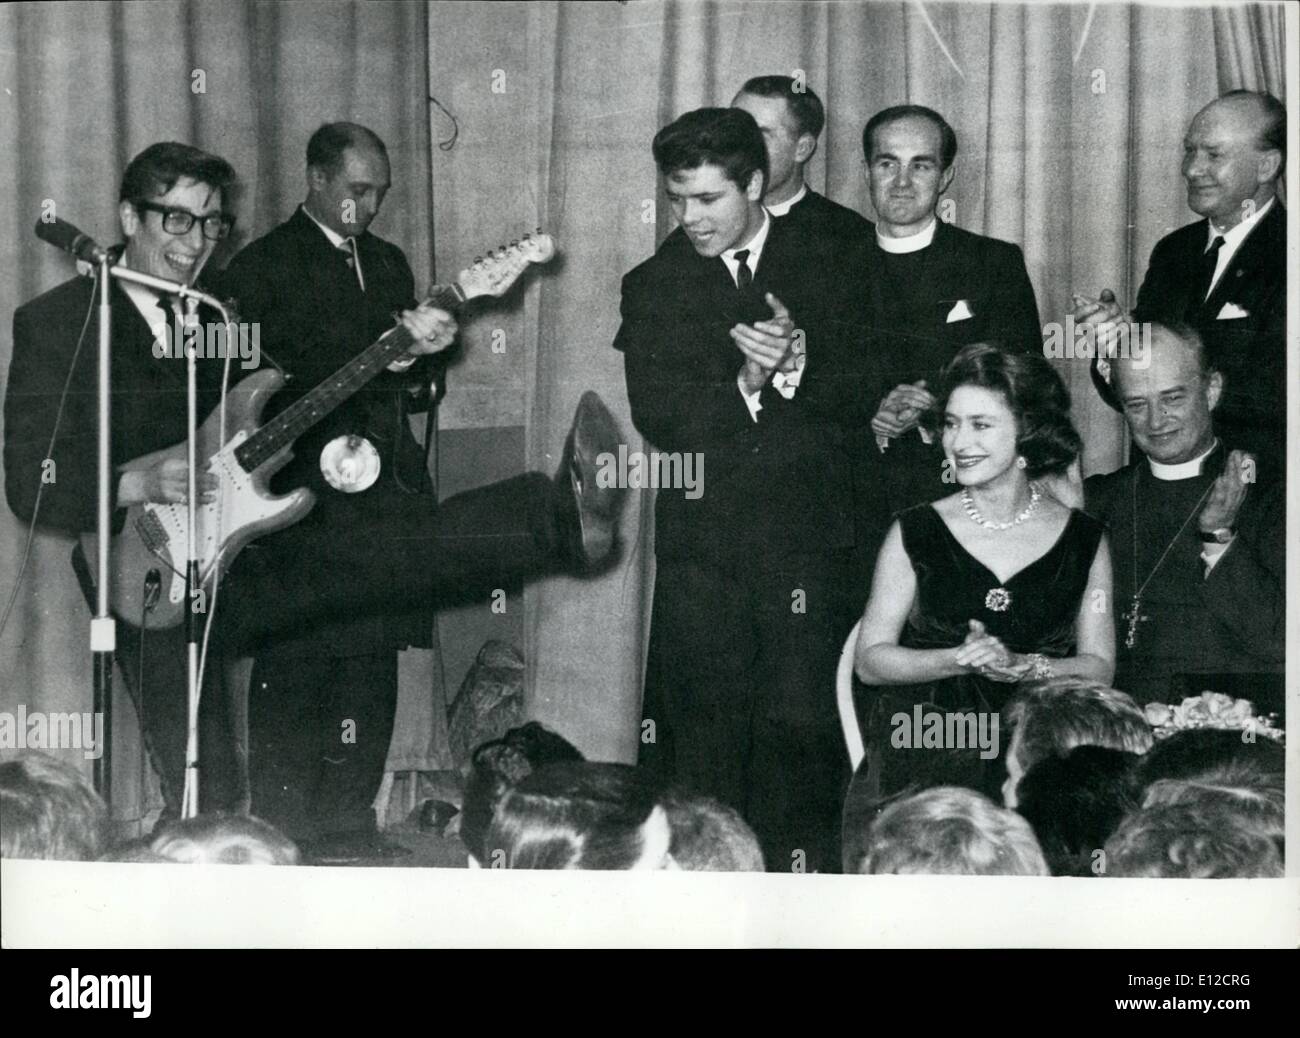 Dec. 16, 2011 - Cliff Richard With Princess Margaret - and they both join in clapping to the guitar of Hank Marvin of The Shadows. The Princess was visiting a youth club in the East End of London. Stock Photo